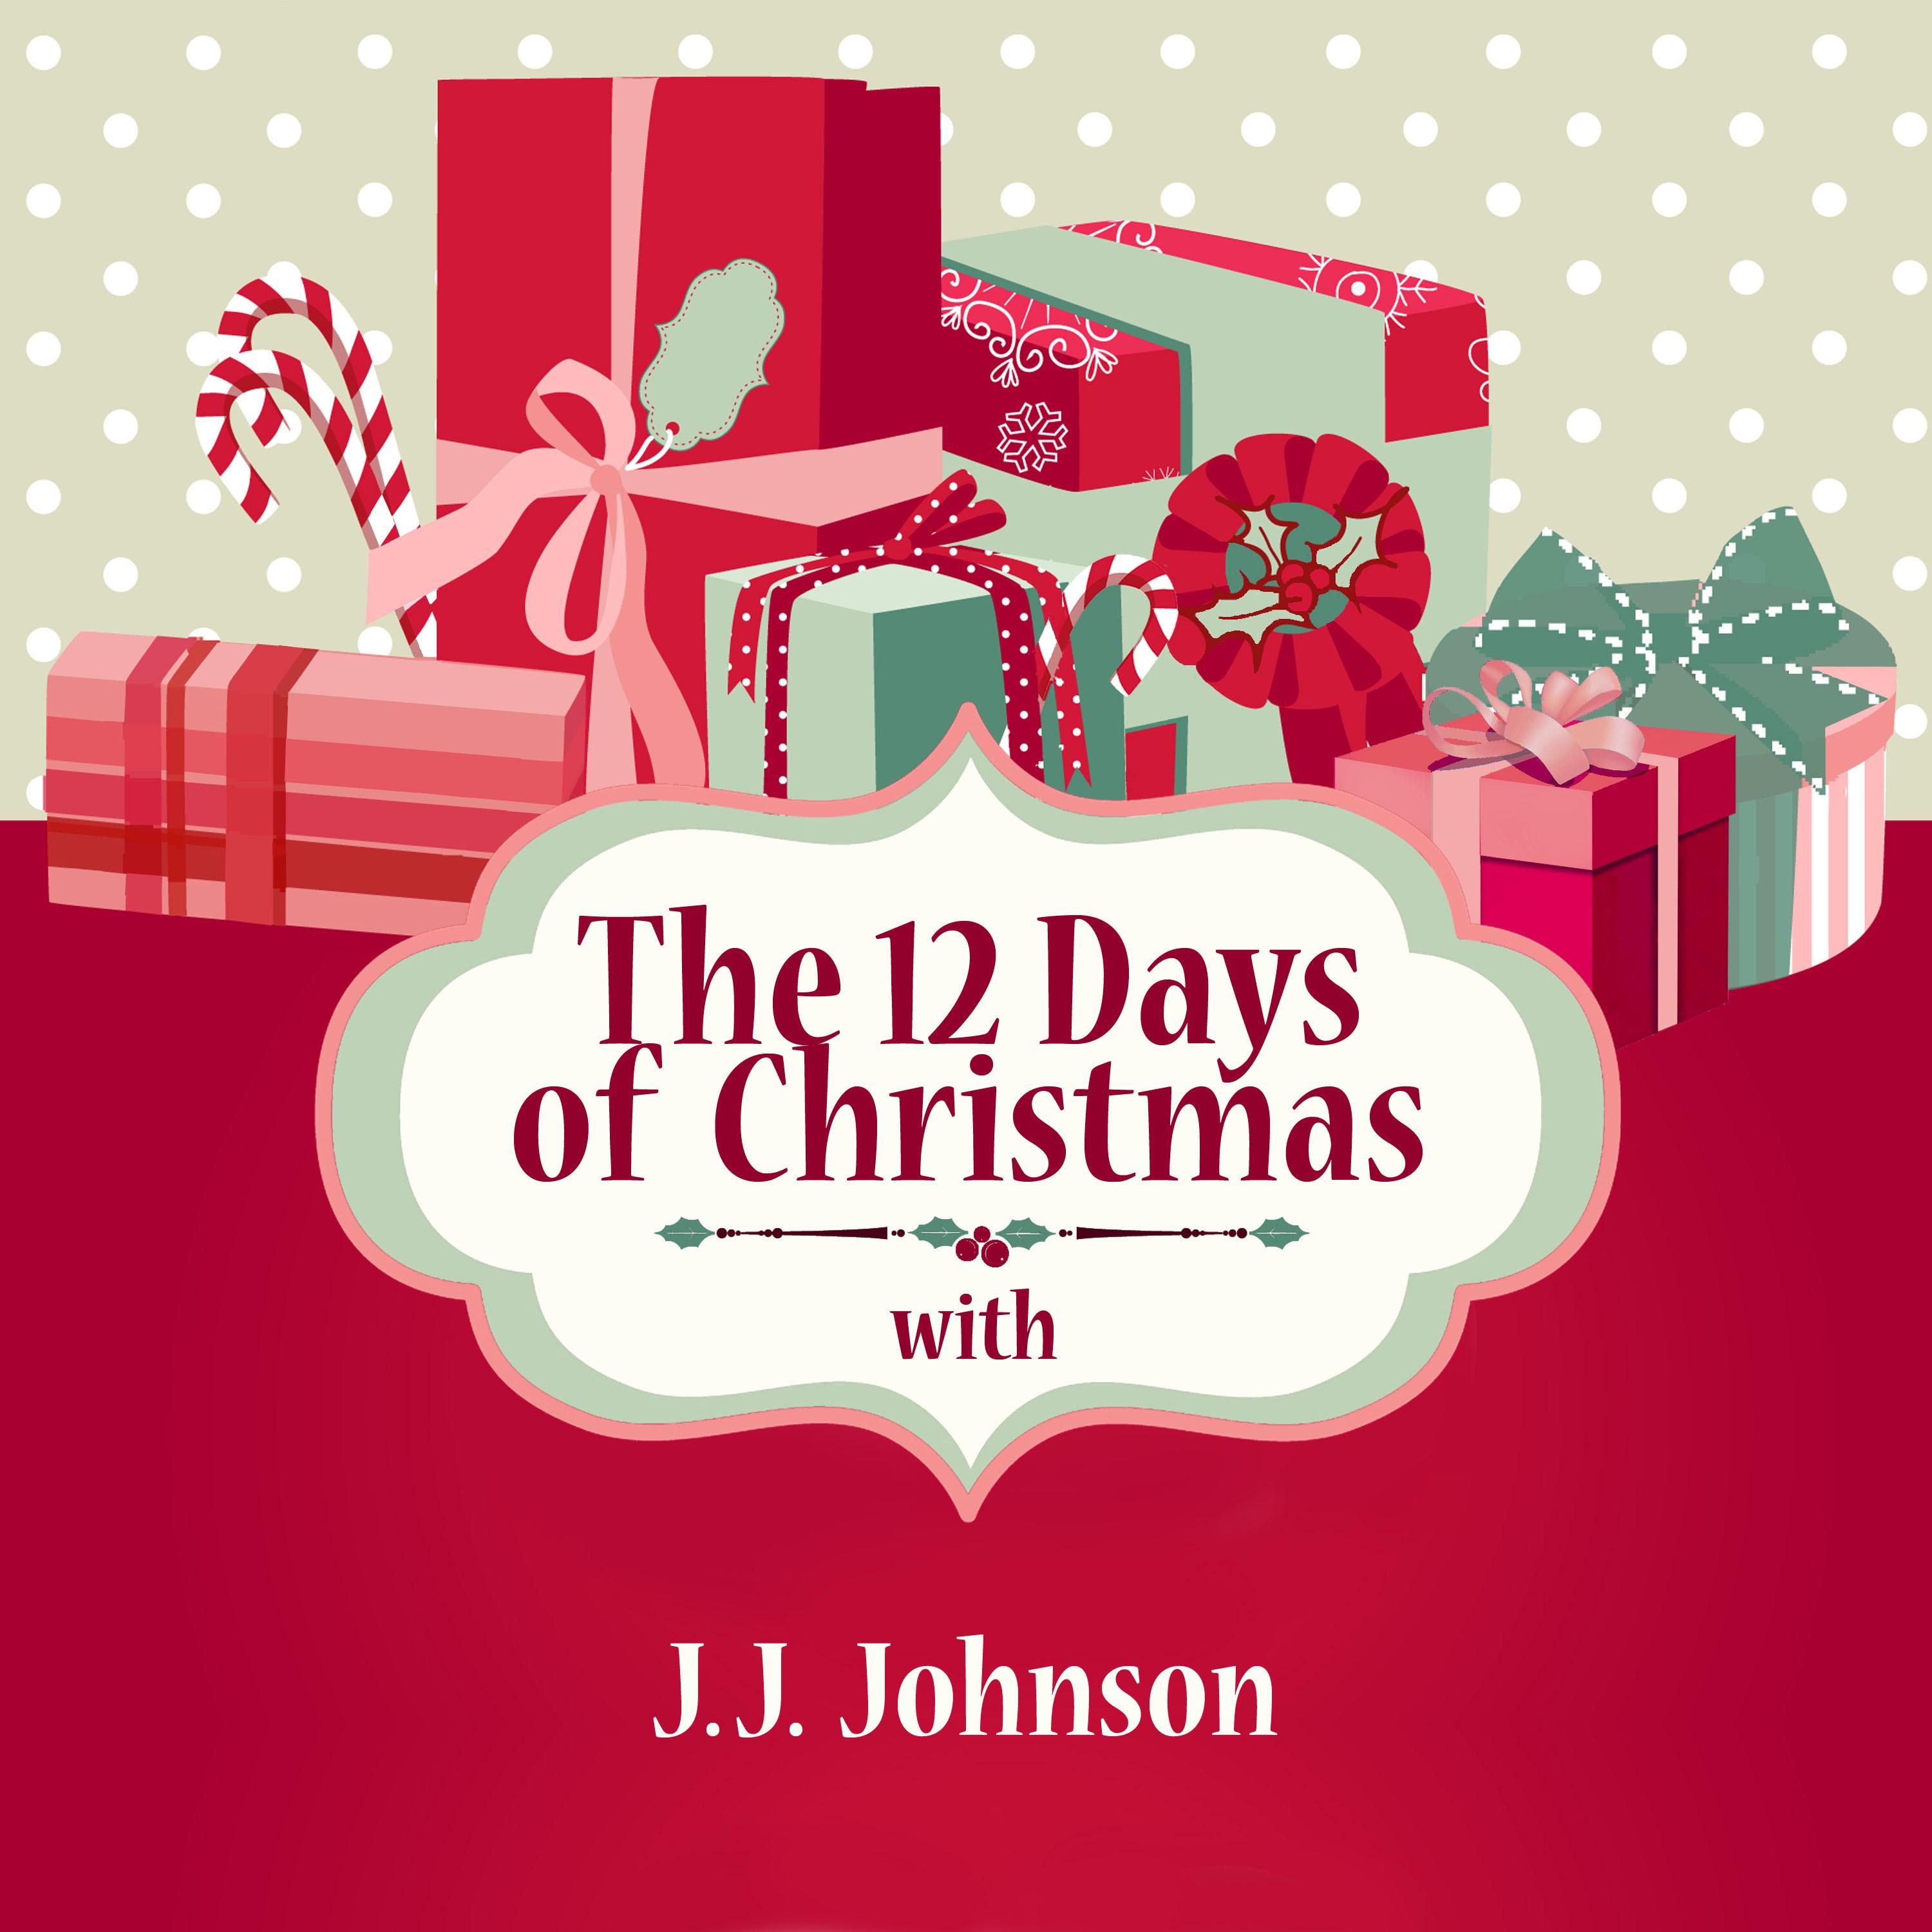 The 12 Days of Christmas with J.J. Johnson